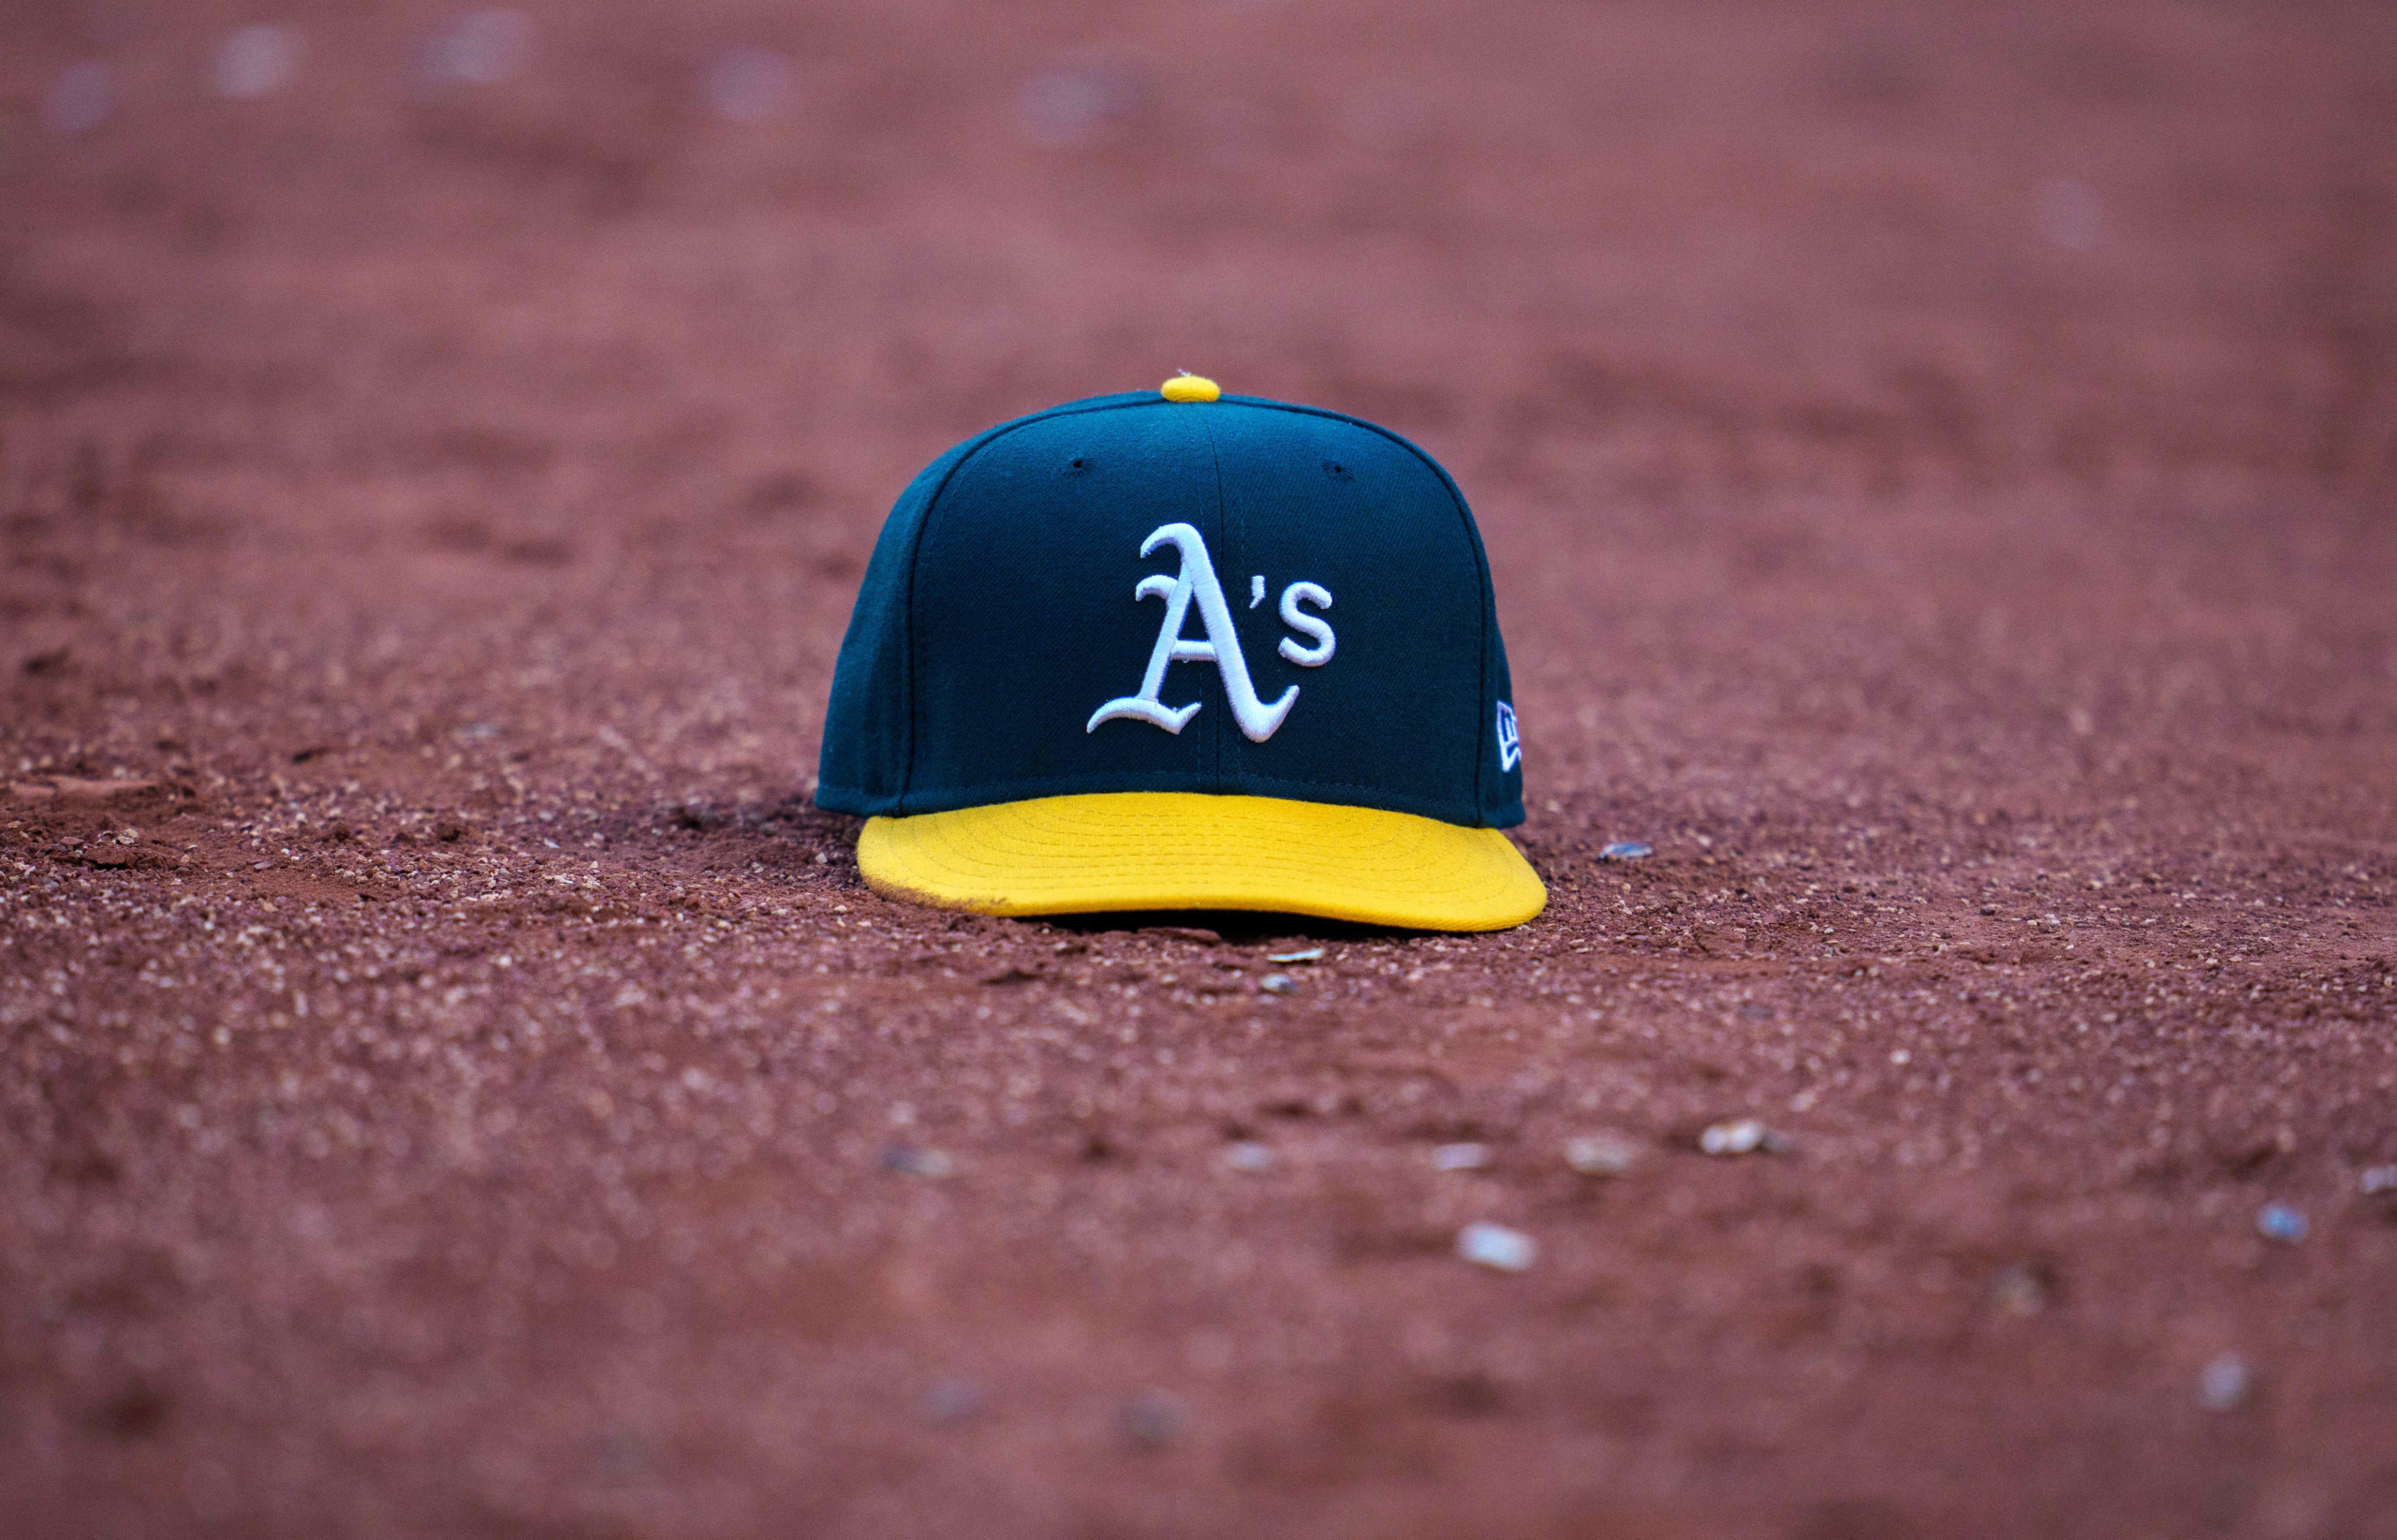 Oakland Athletics inch closer to Las Vegas following comments from MLB Commissioner Rob Manfred